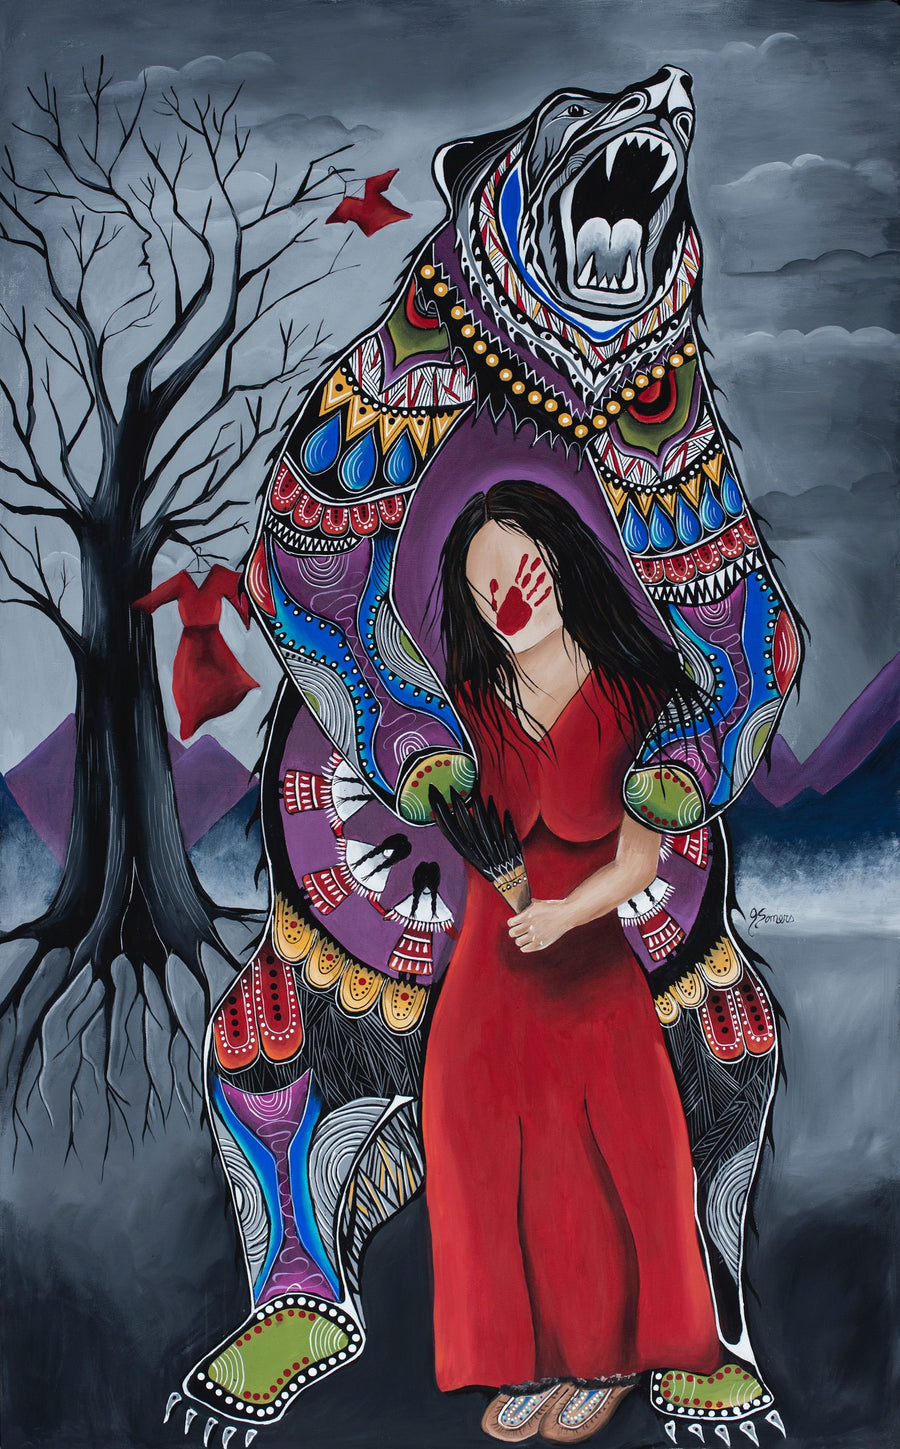 Ganawenda (To Protect) - art by artist from Canada Jessica Somers - artterra online art gallery - Buy art of Canada Online - We ship to USA and Canada